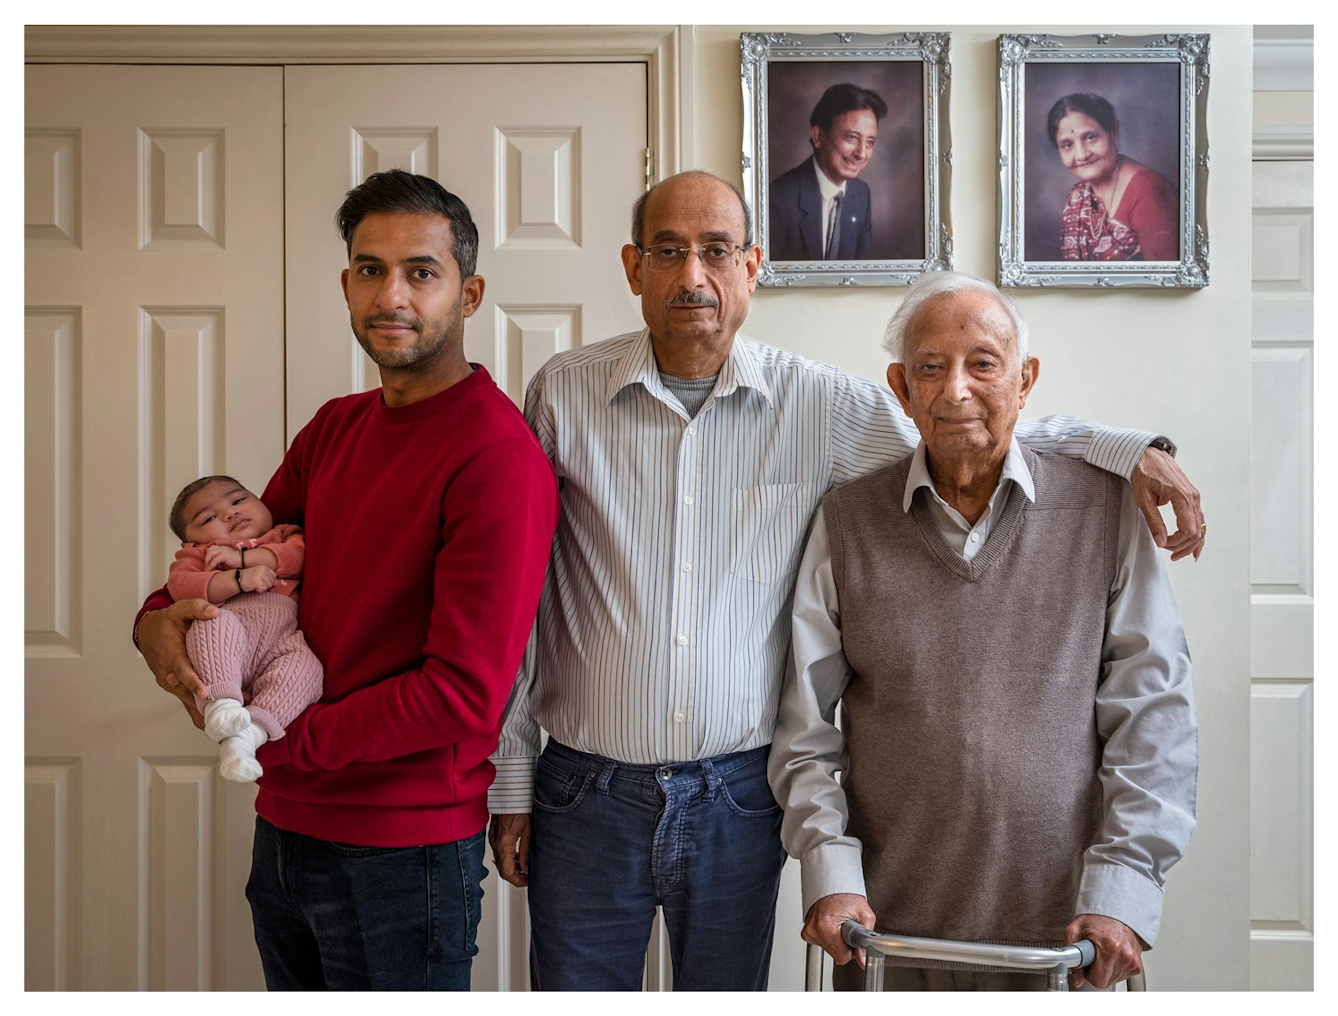 Family group photograph showing four generations of the same family. The great-grandfather stands on the right holding a walking frame, by his side is the grandfather whose arm rests on the great-grandfather's shoulder. Next to him is the grandson who cradles the great-granddaughter who is a baby in his arms. They are stood in front of a white wall on which two studio portraits are hung in silver frames, showing the great-grandfather and his wife many years before. They all look straight into the camera.